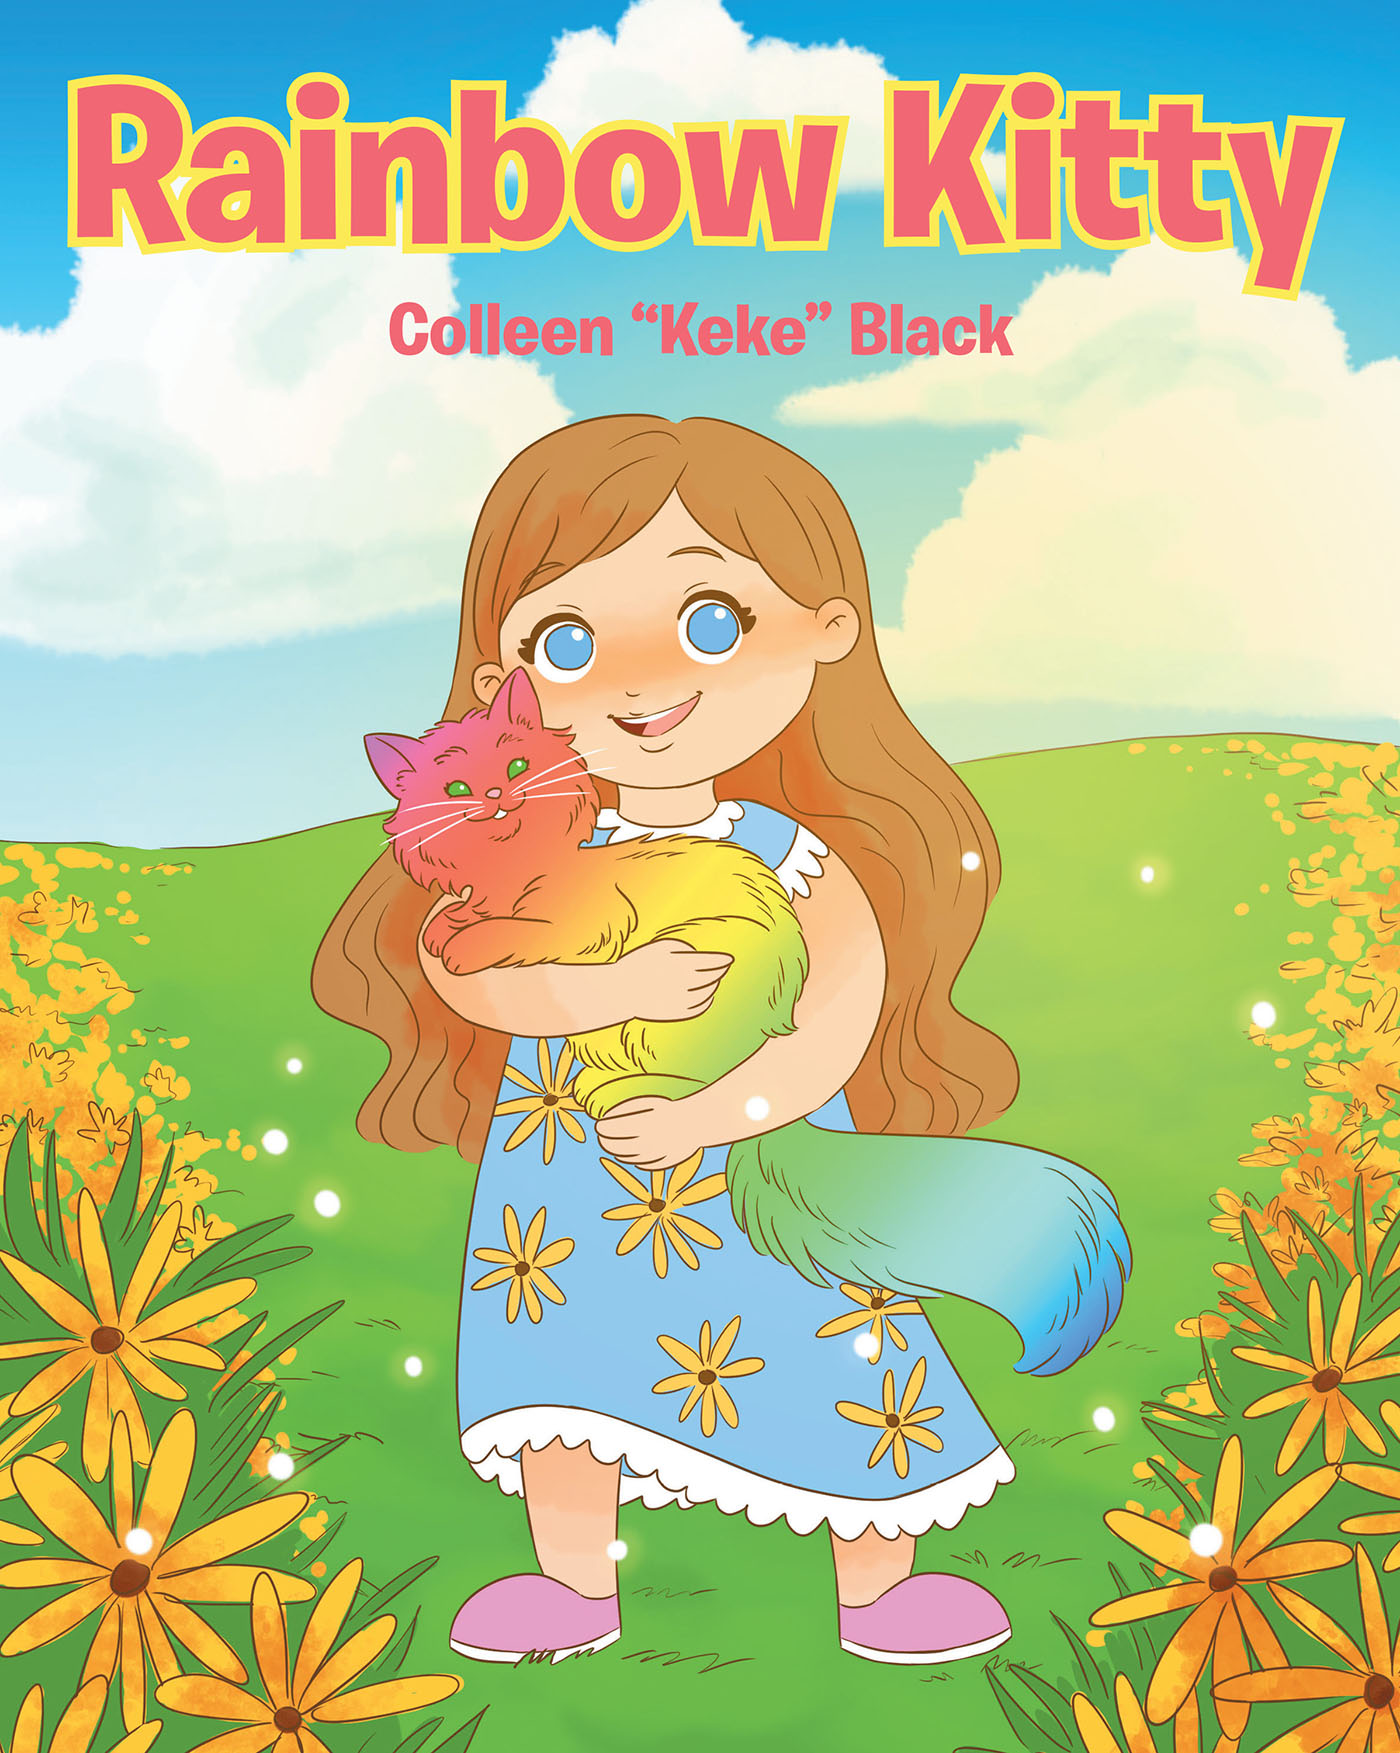 Colleen "Keke" Black’s Newly Released "Rainbow Kitty" is a Charming Story of a Little Girl with a Vivid Imagination and a Special Friendship